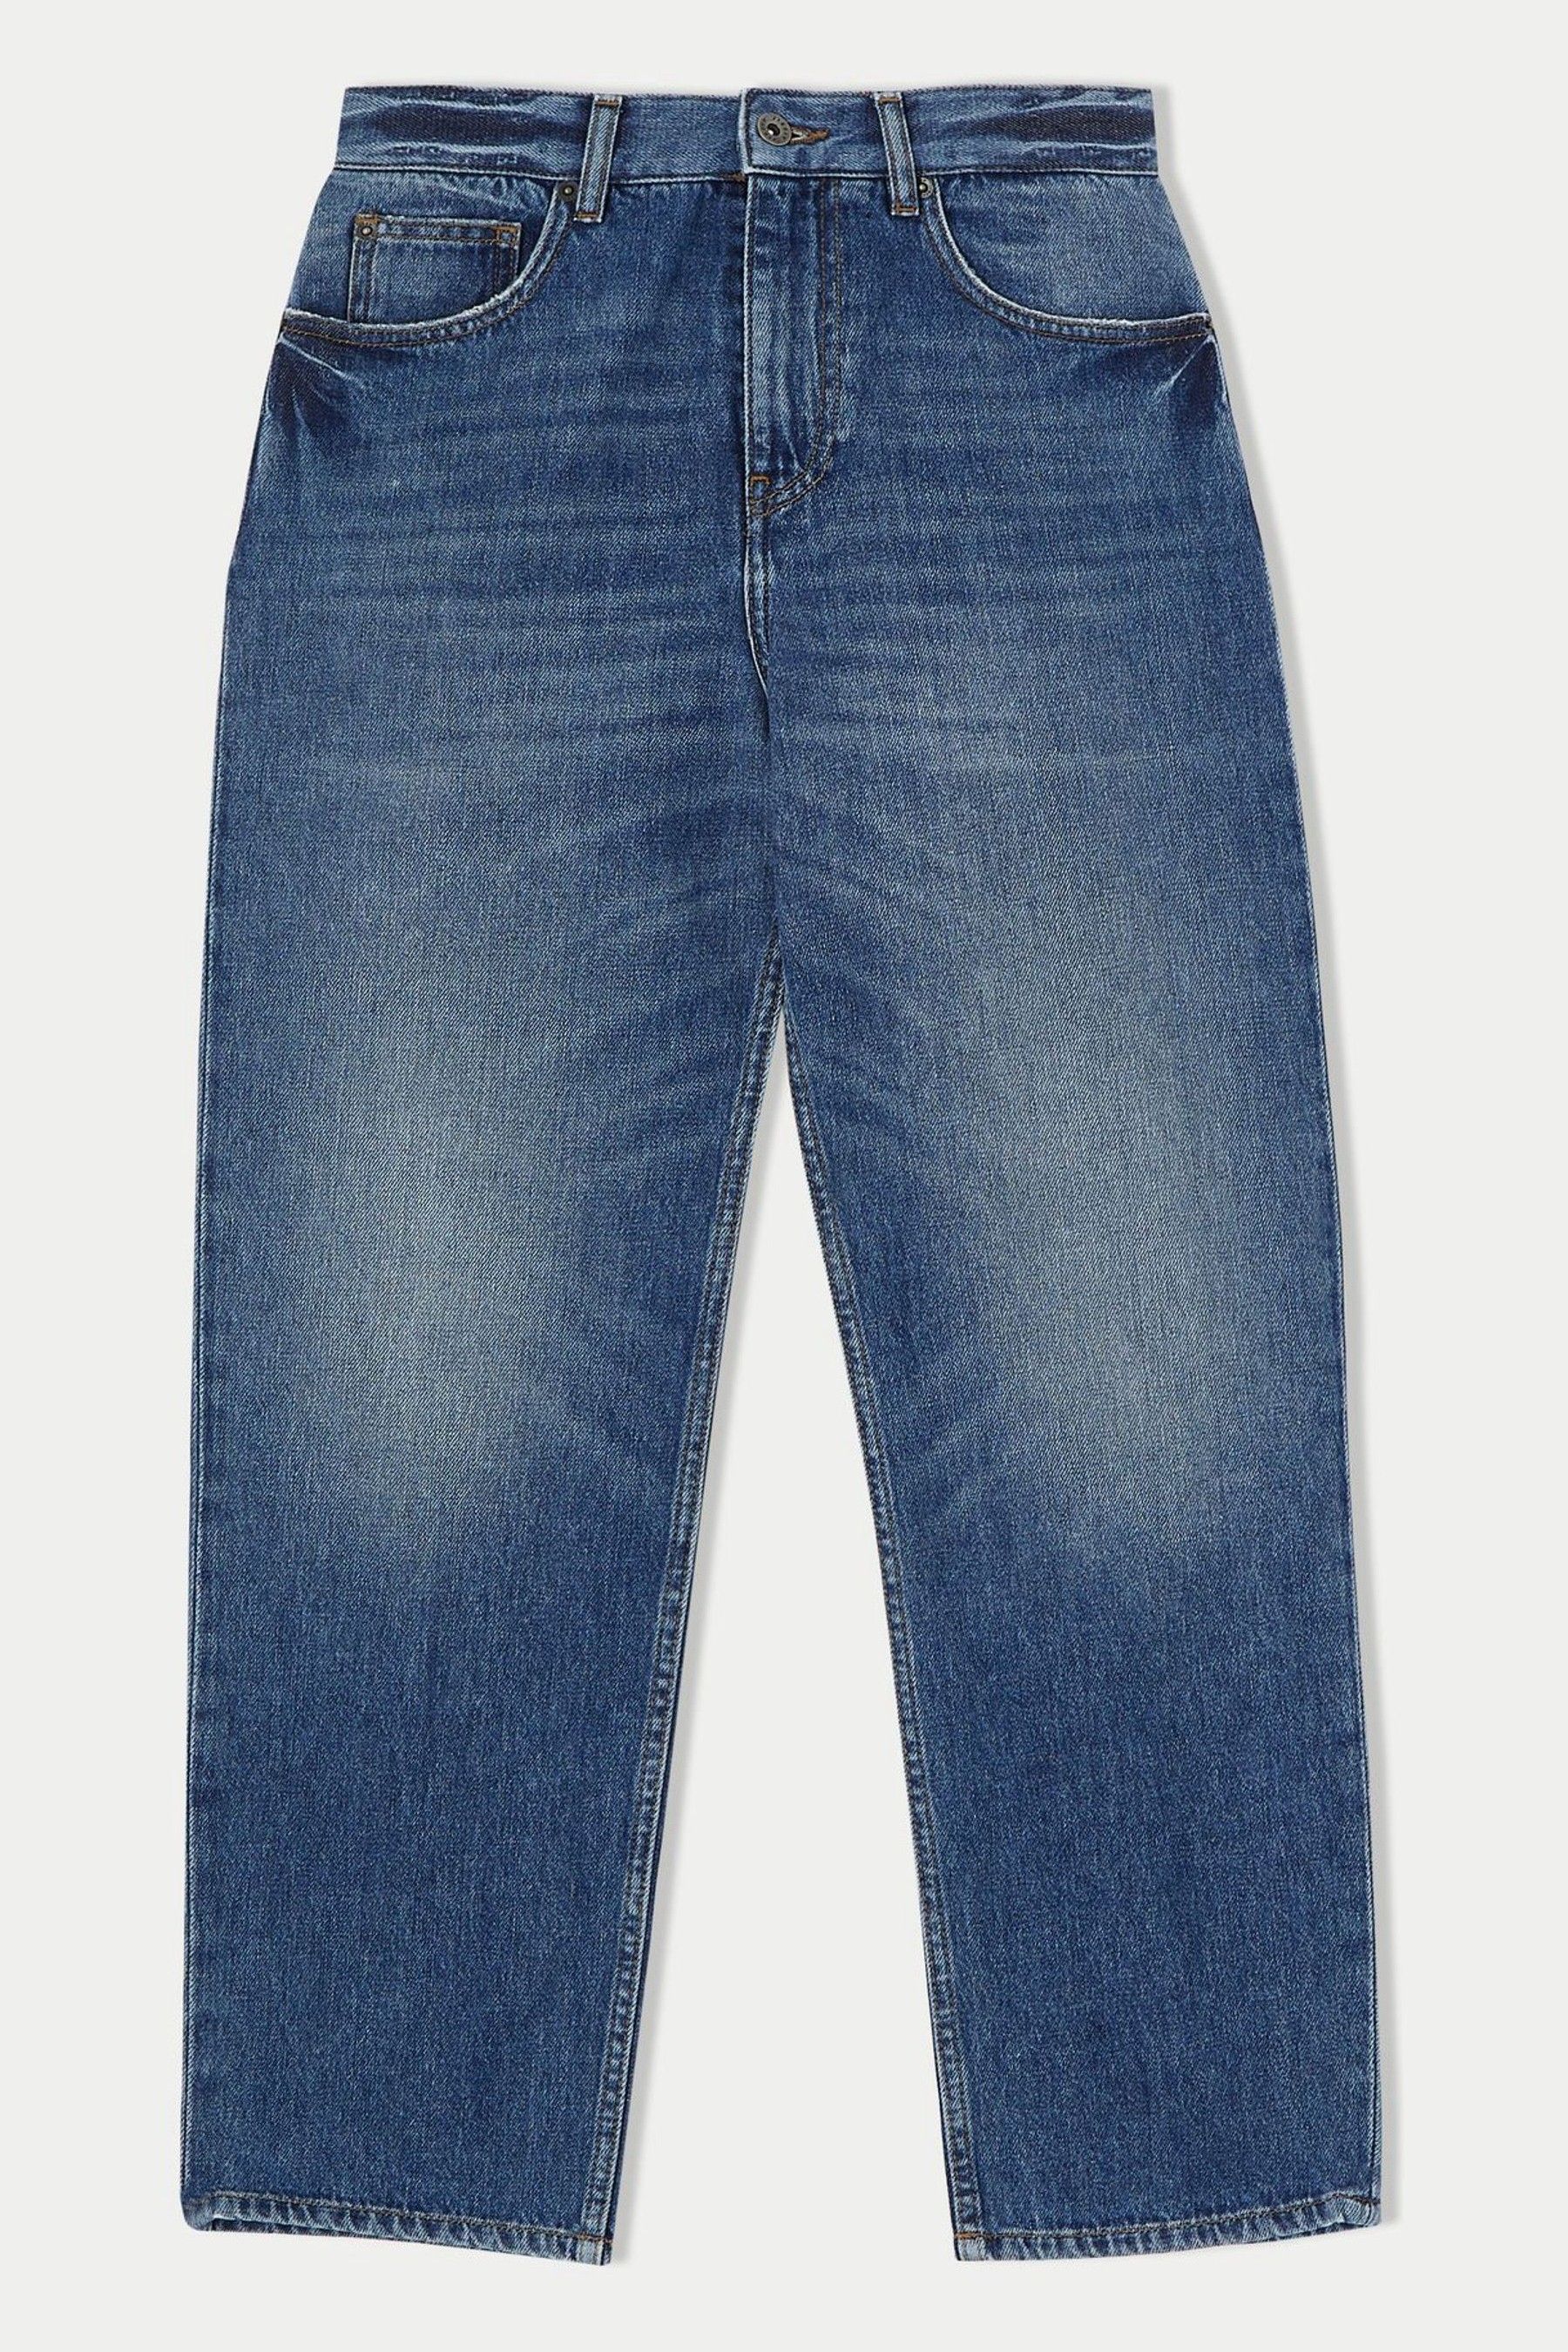 Buy Jigsaw Blue Delmont Jeans from the Next UK online shop